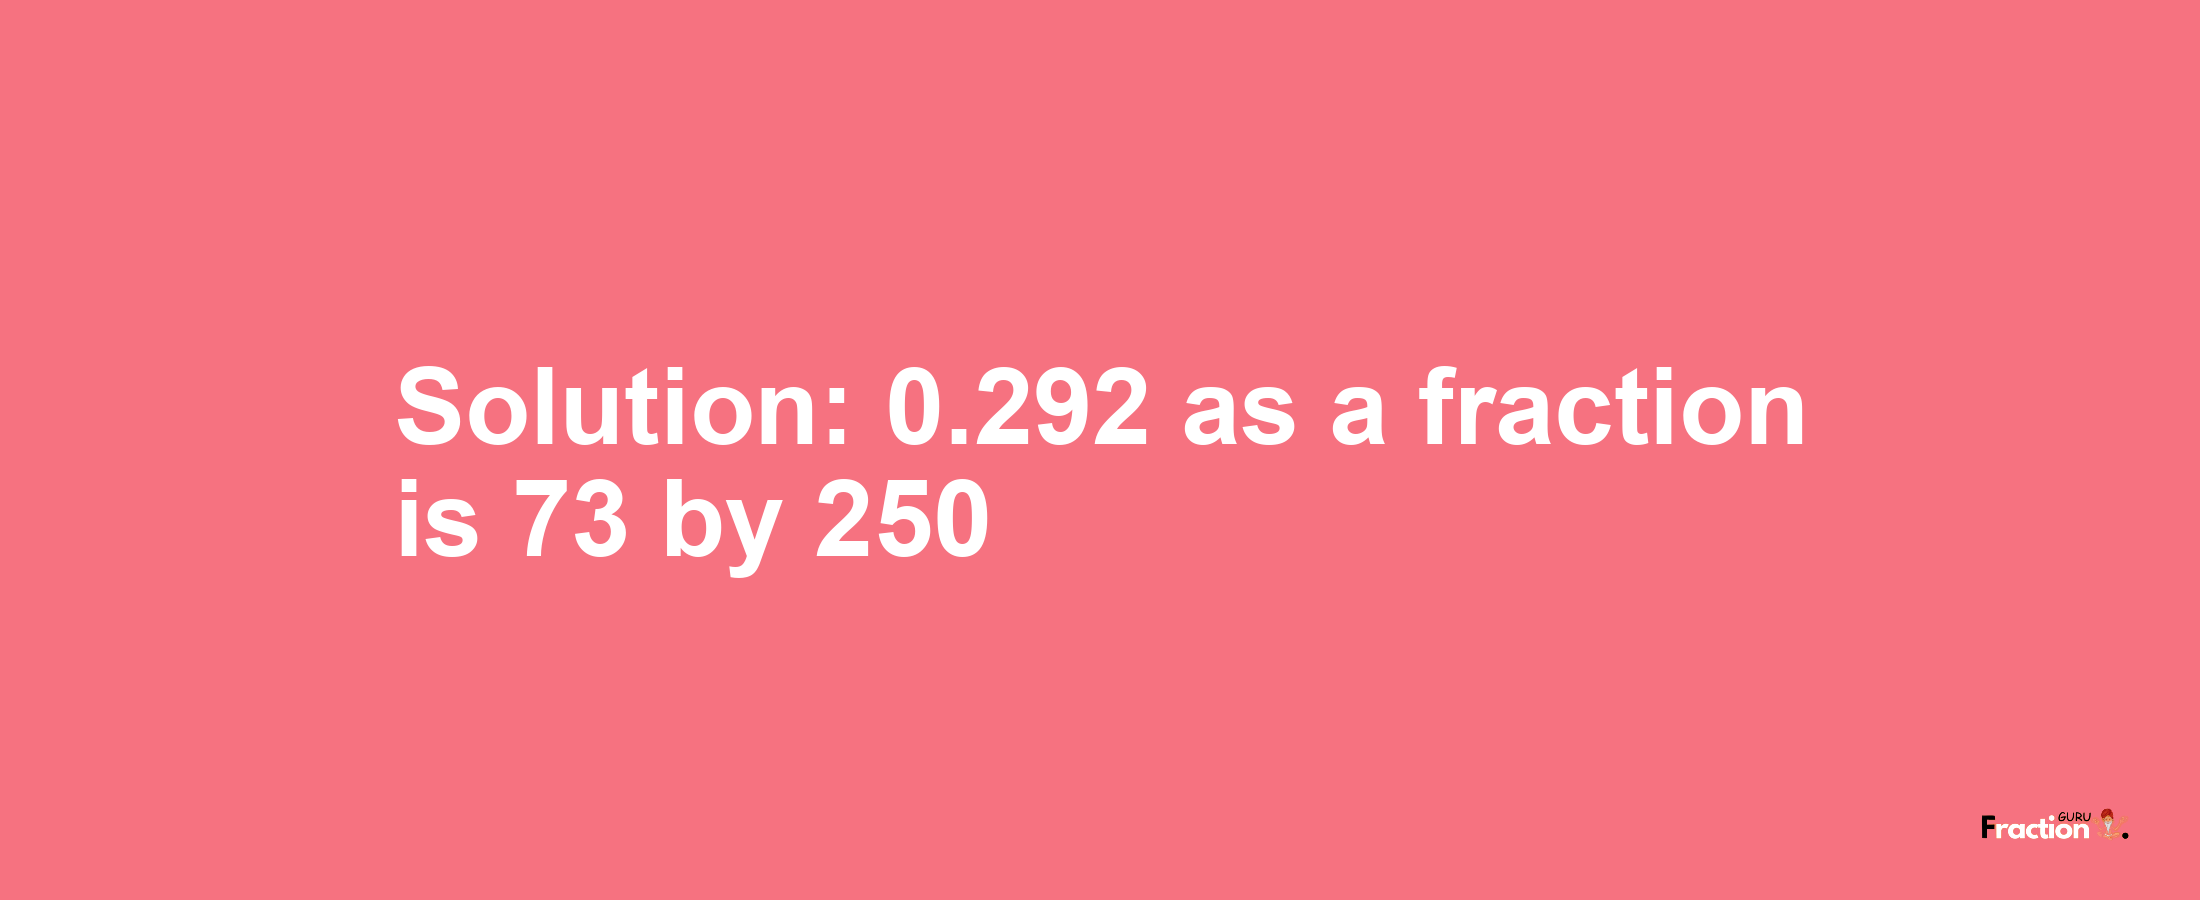 Solution:0.292 as a fraction is 73/250